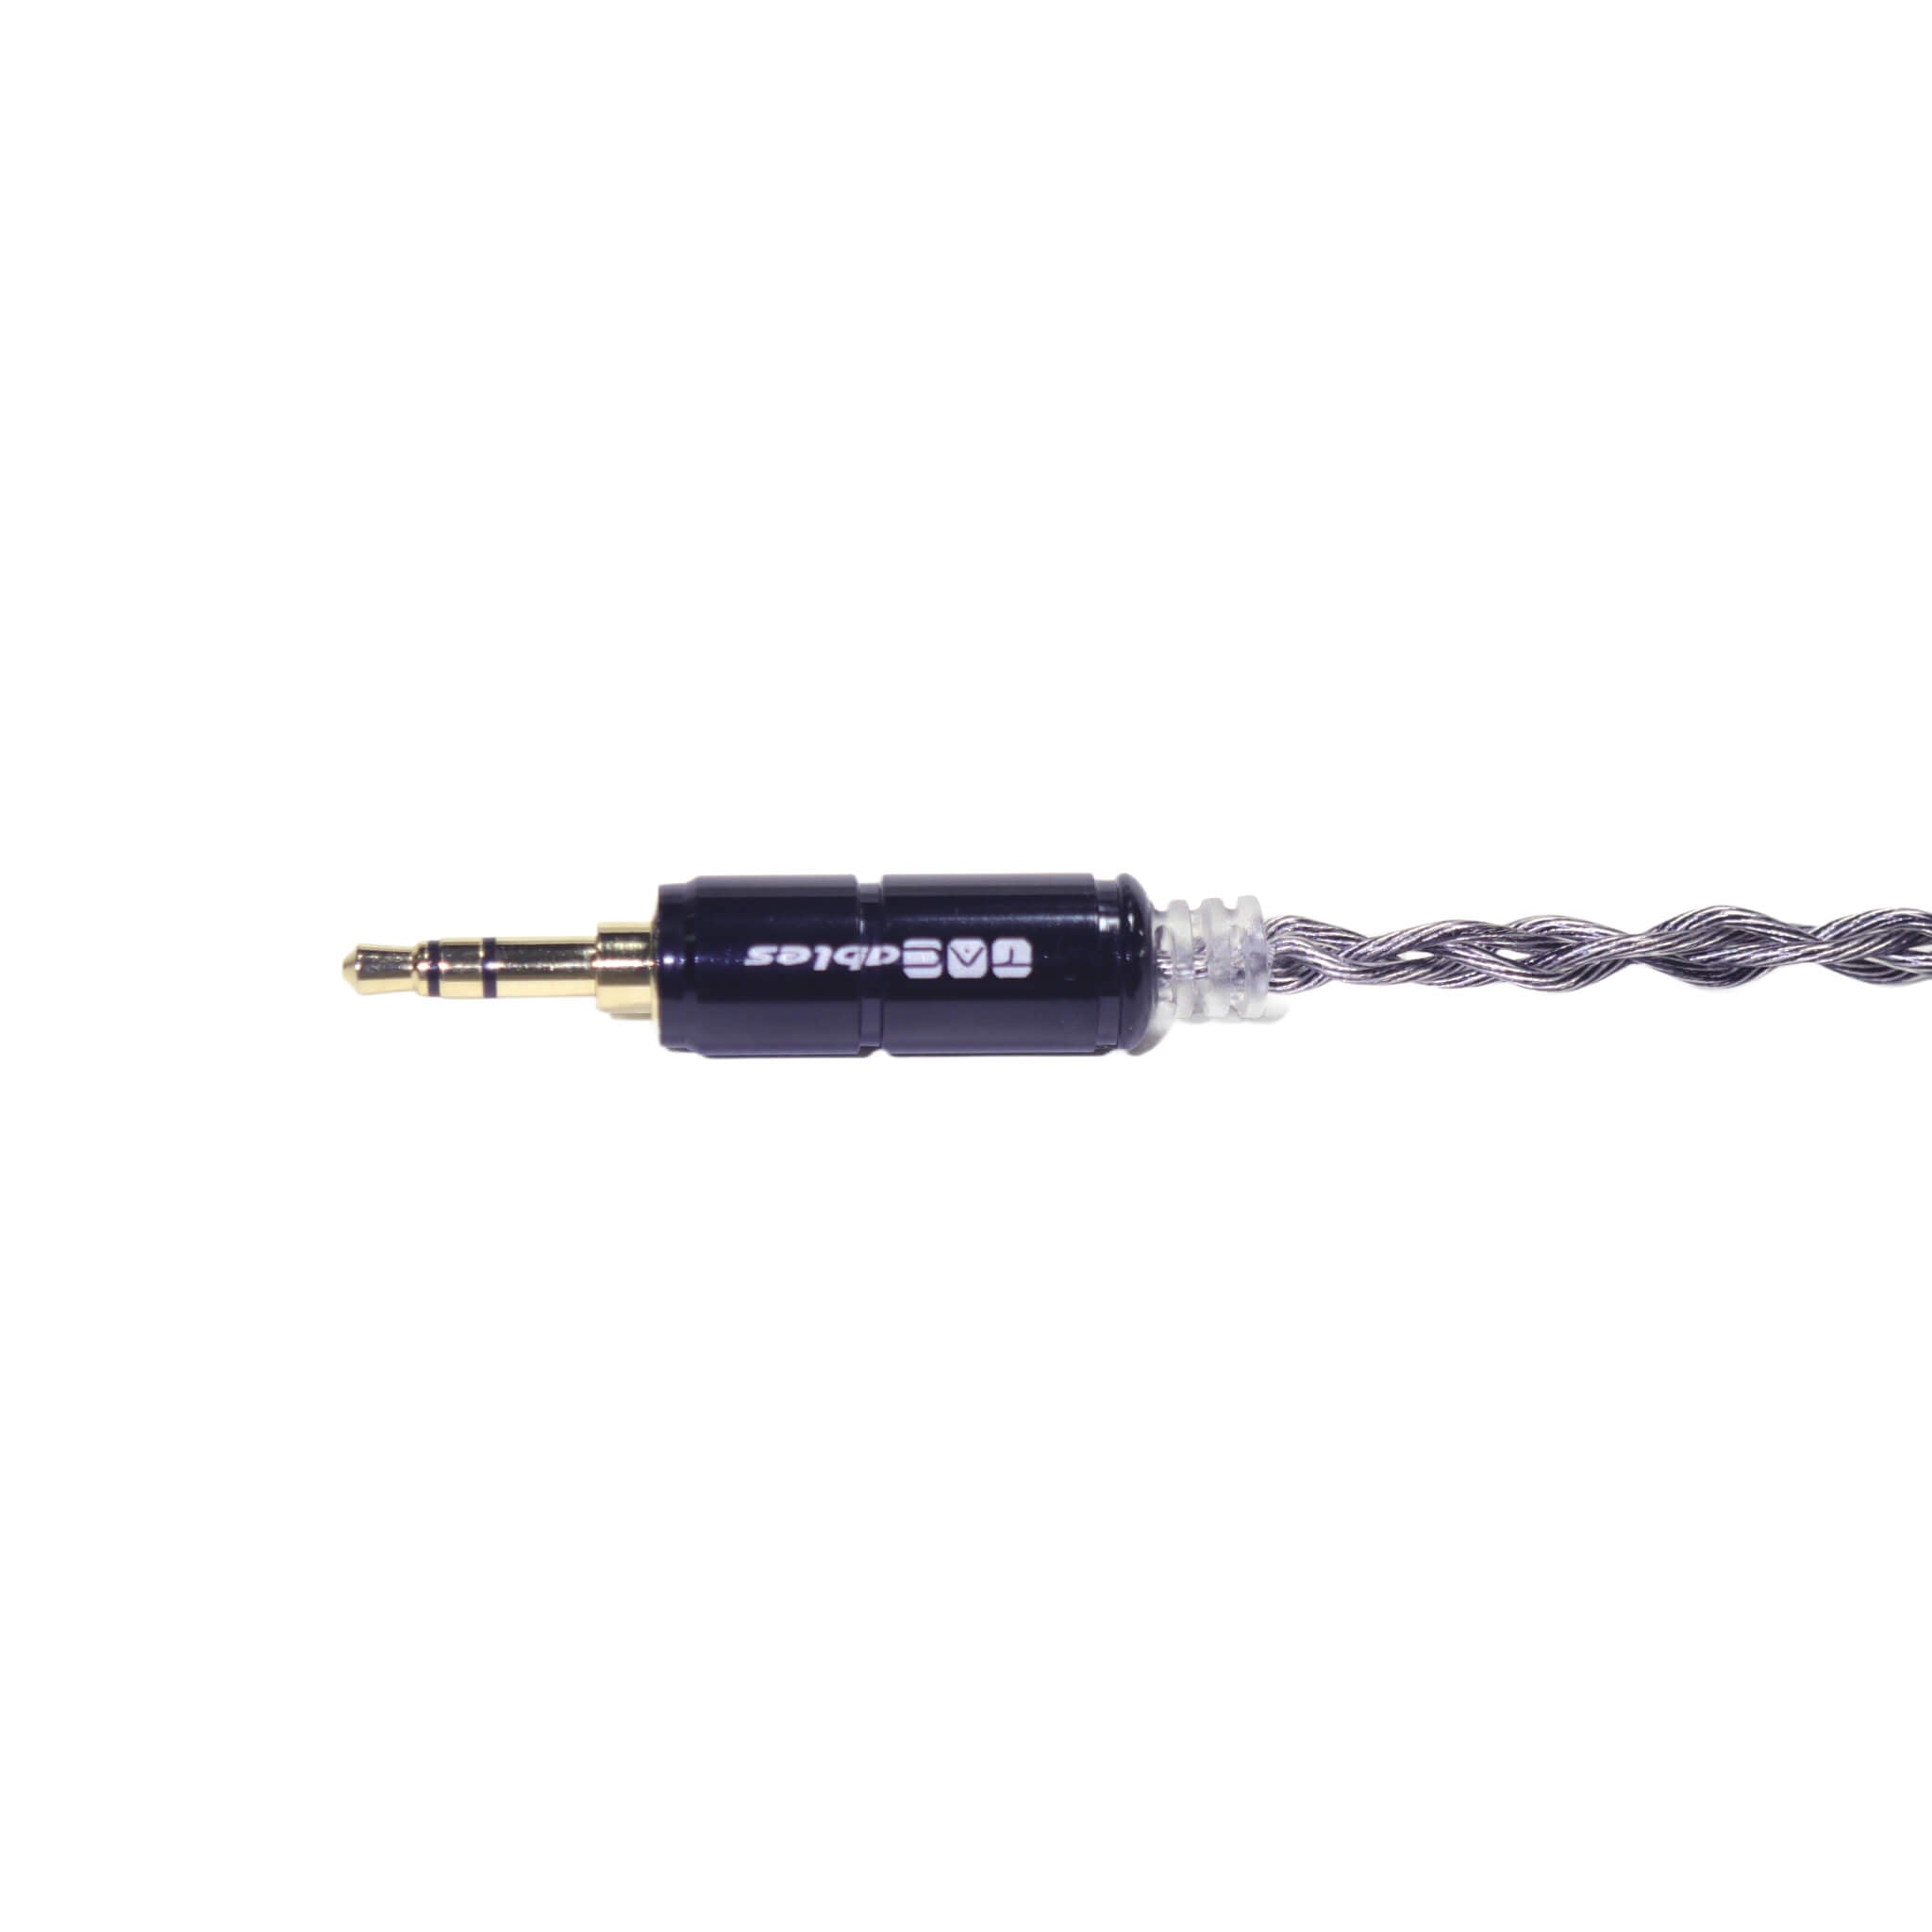 Buy TACables Obsidian Cable at HiFiNage in India with warranty.